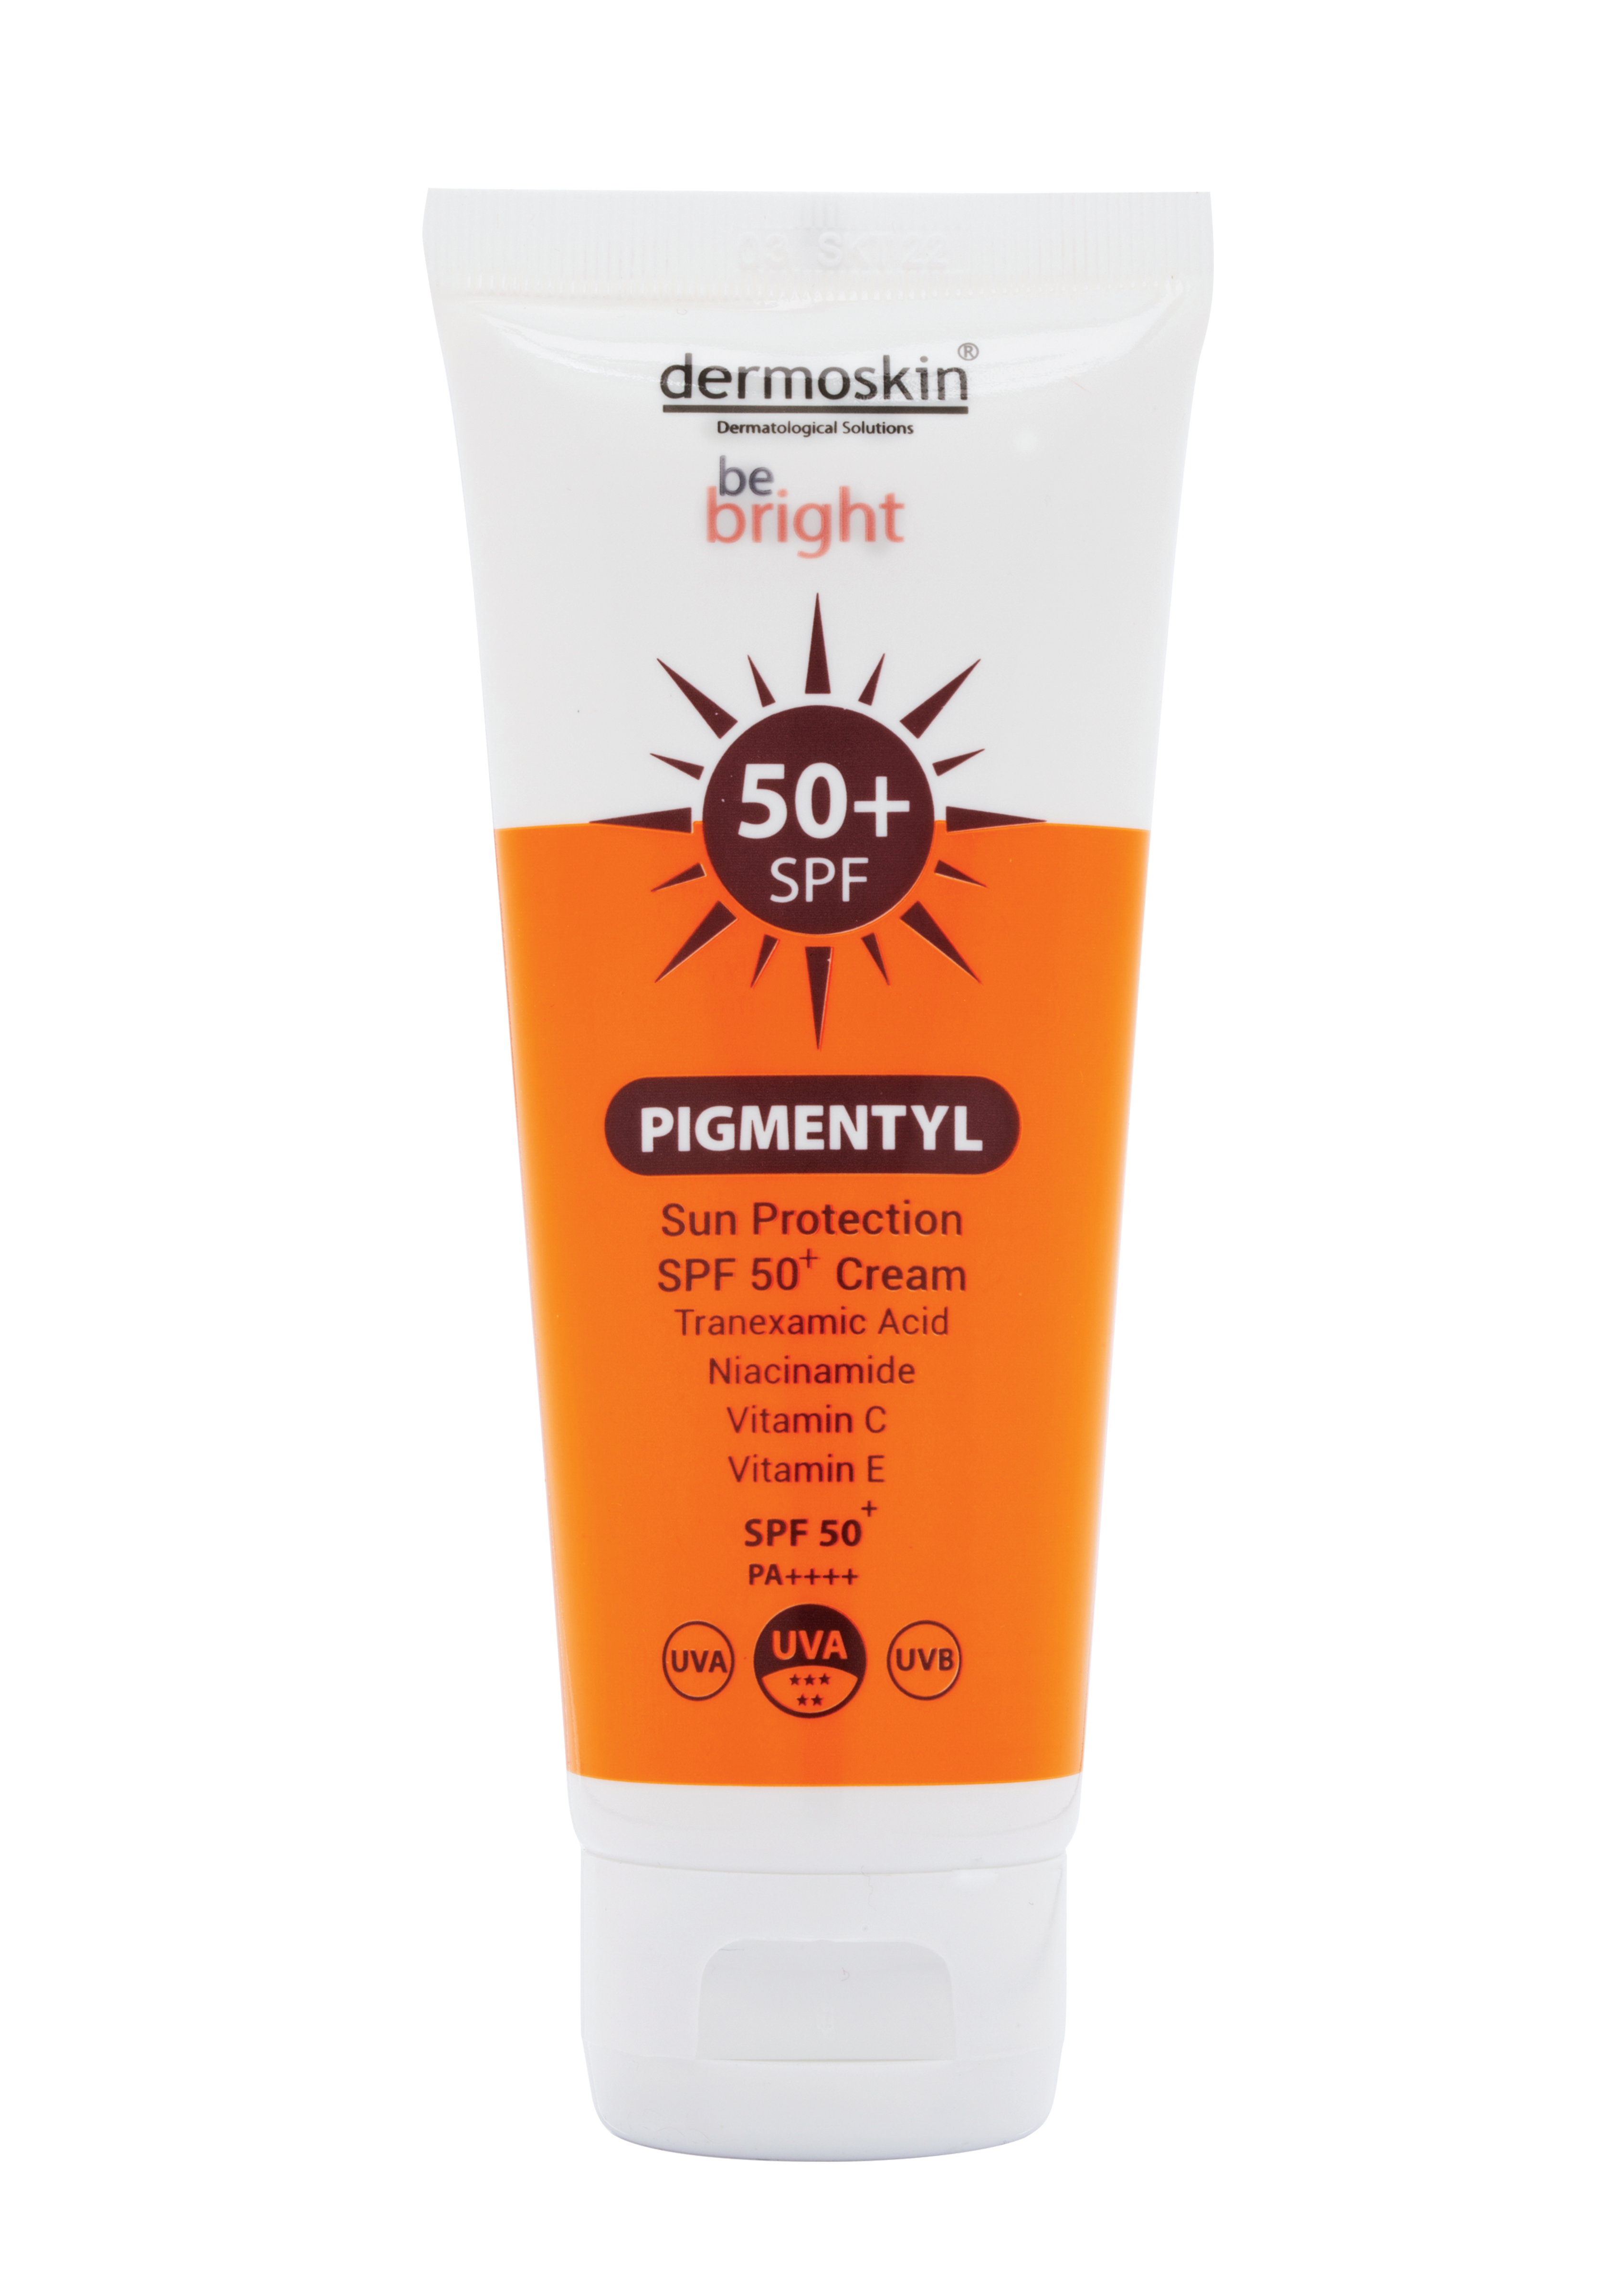 DERMOSKIN SUN SERIES HAS PROTECTION FOR ALL SKIN TYPES!